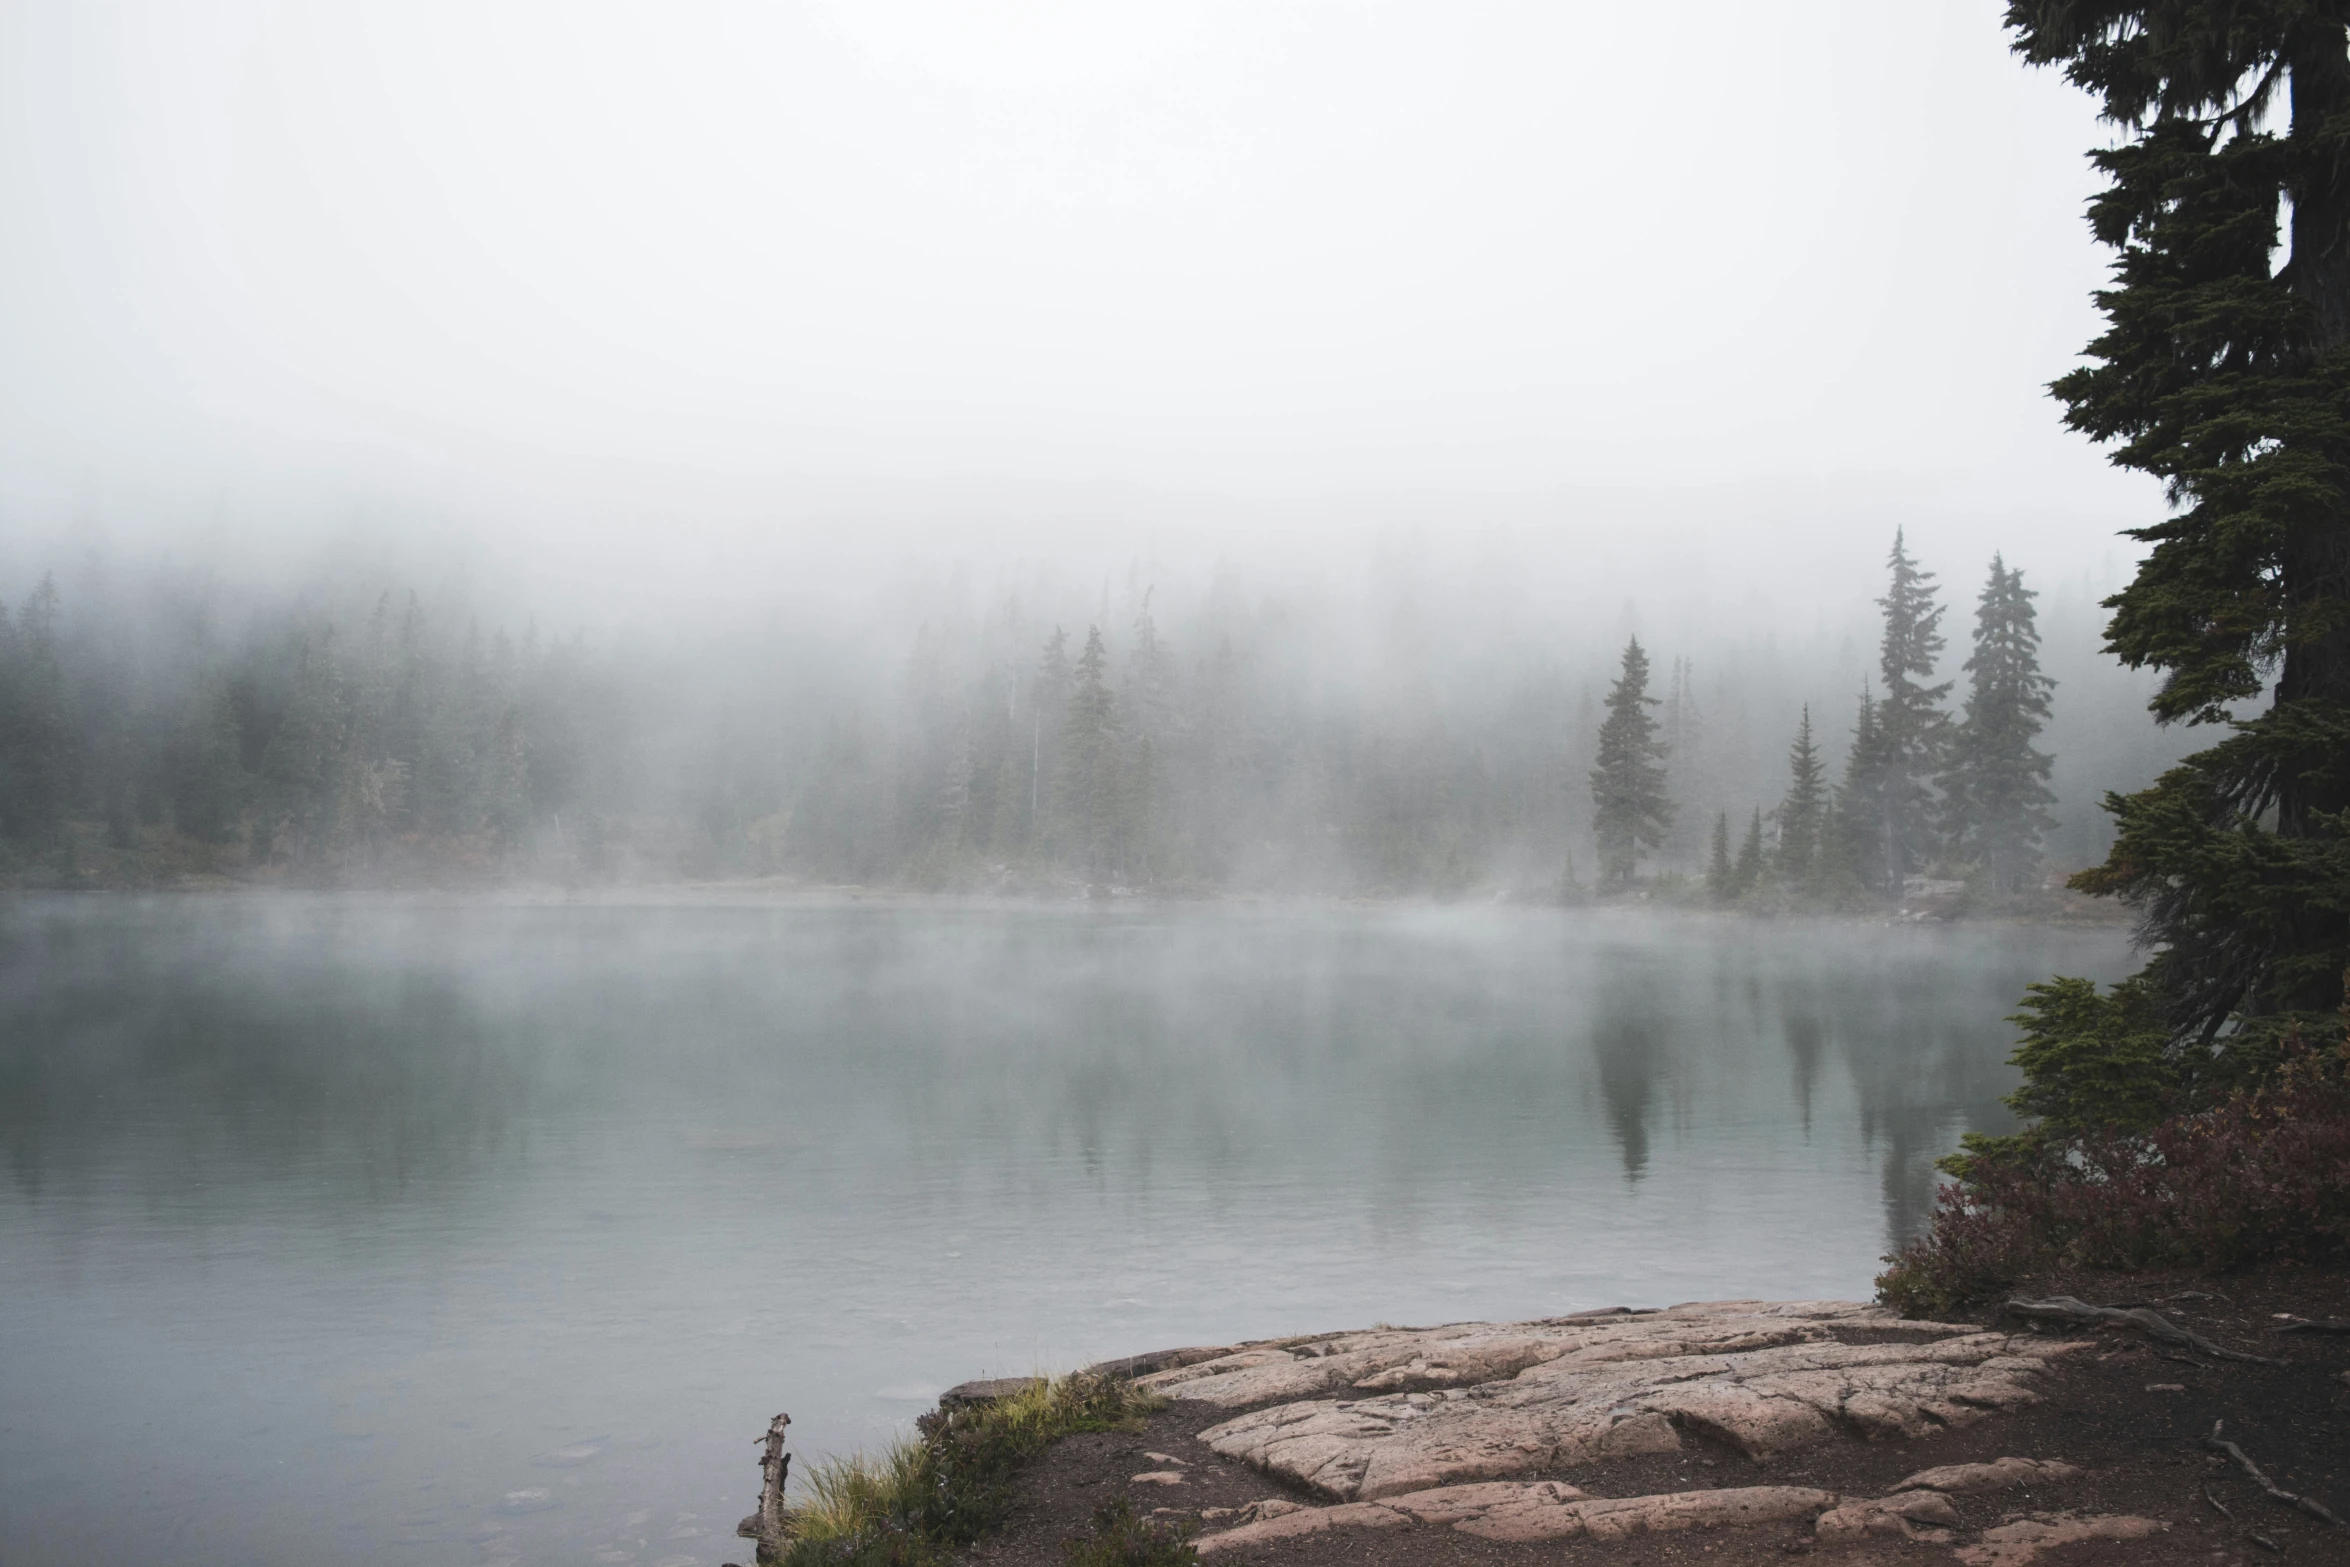 a lone boat in a foggy lake surrounded by trees